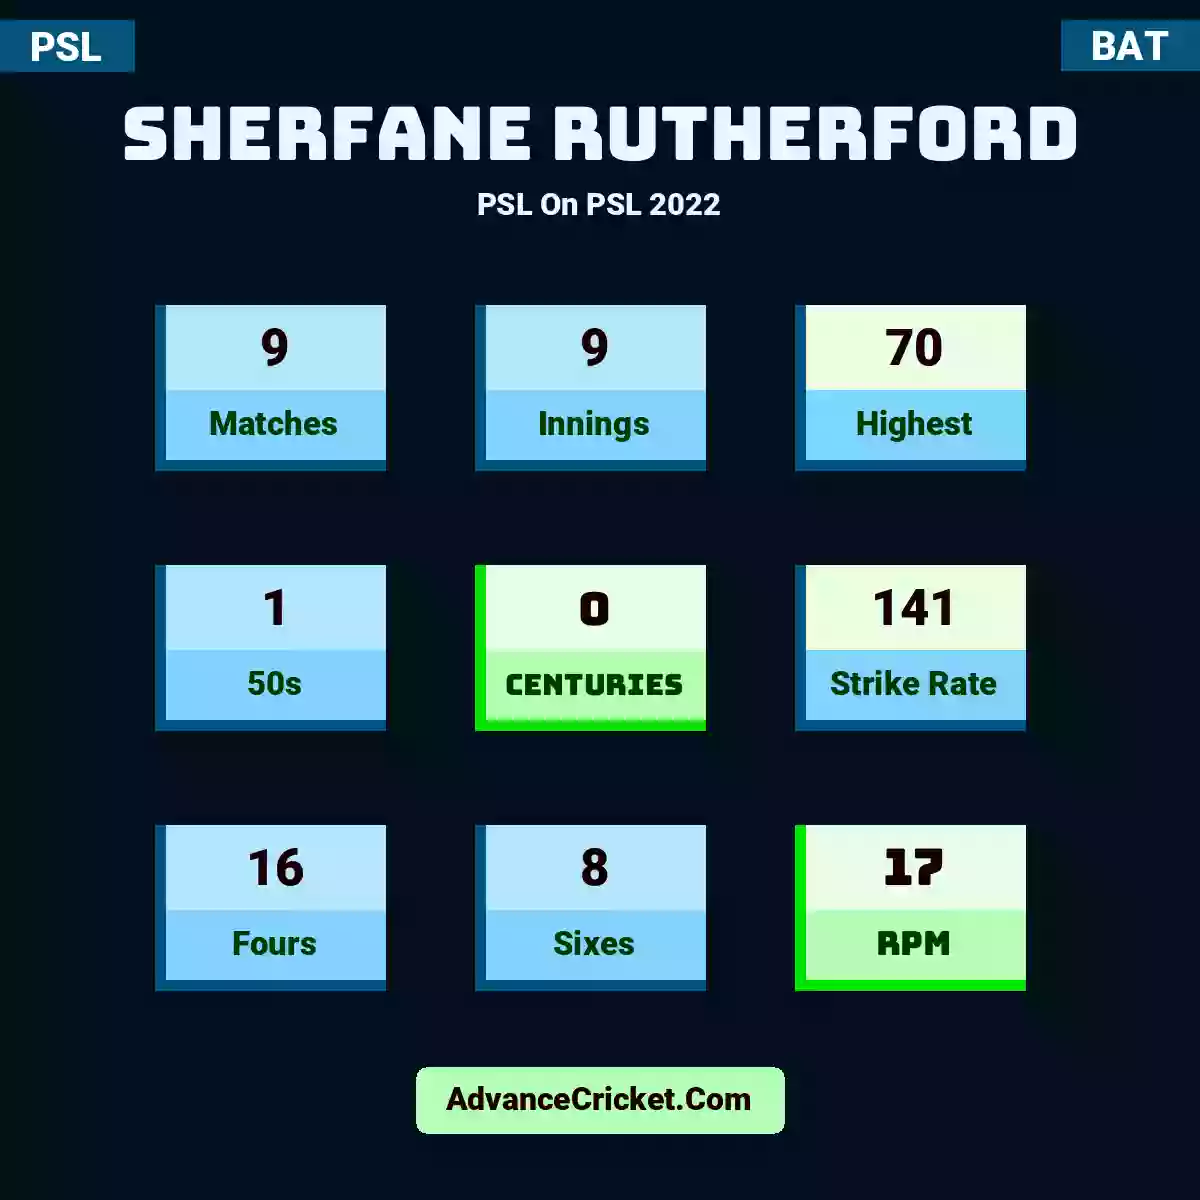 Sherfane Rutherford PSL  On PSL 2022, Sherfane Rutherford played 9 matches, scored 70 runs as highest, 1 half-centuries, and 0 centuries, with a strike rate of 141. S.Rutherford hit 16 fours and 8 sixes, with an RPM of 17.